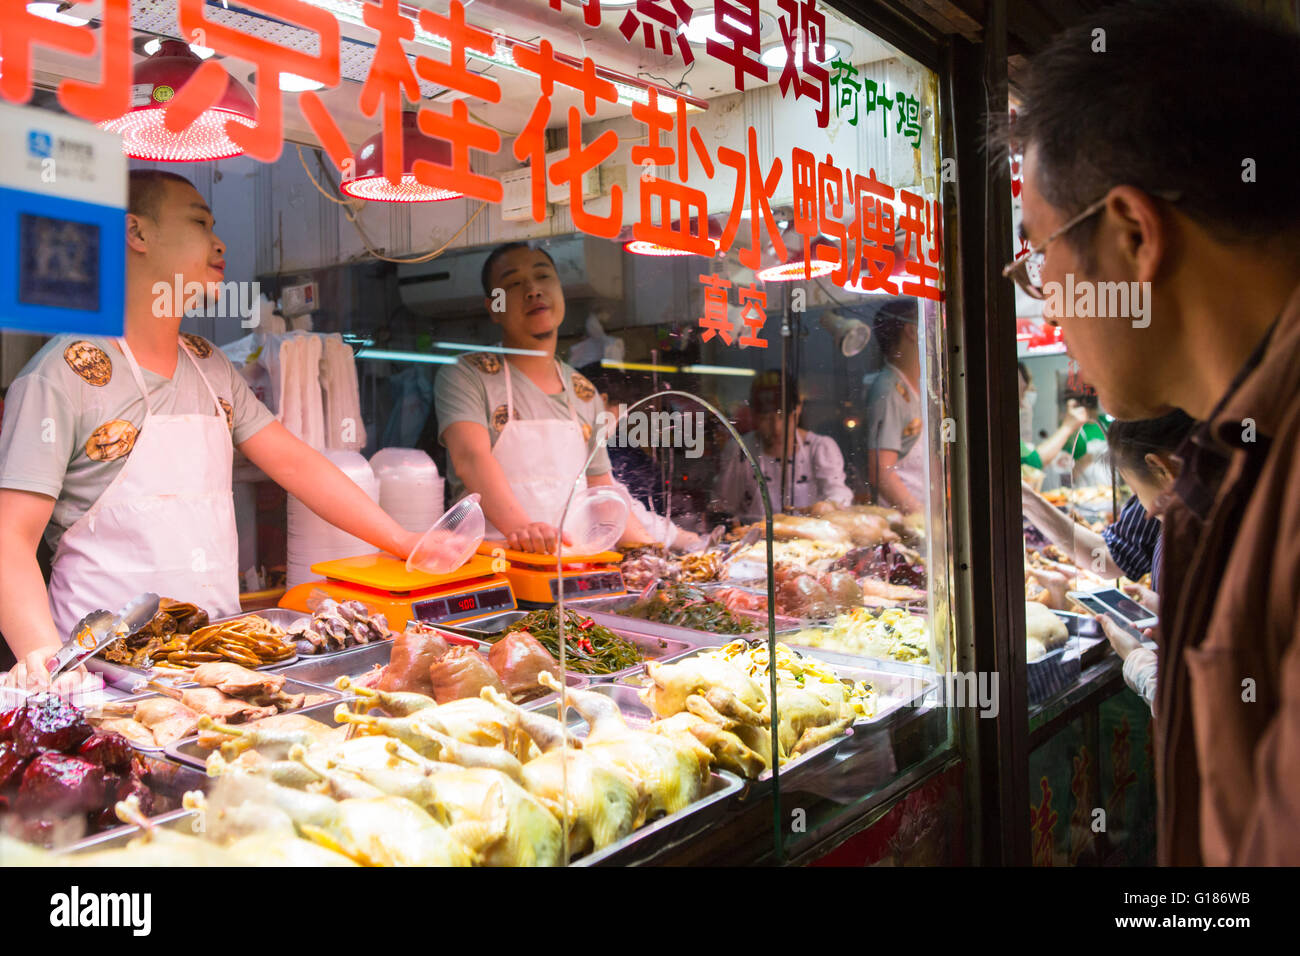 Customer watching Chinese butchers selling meat at a indoor market in Nanjing, China Stock Photo